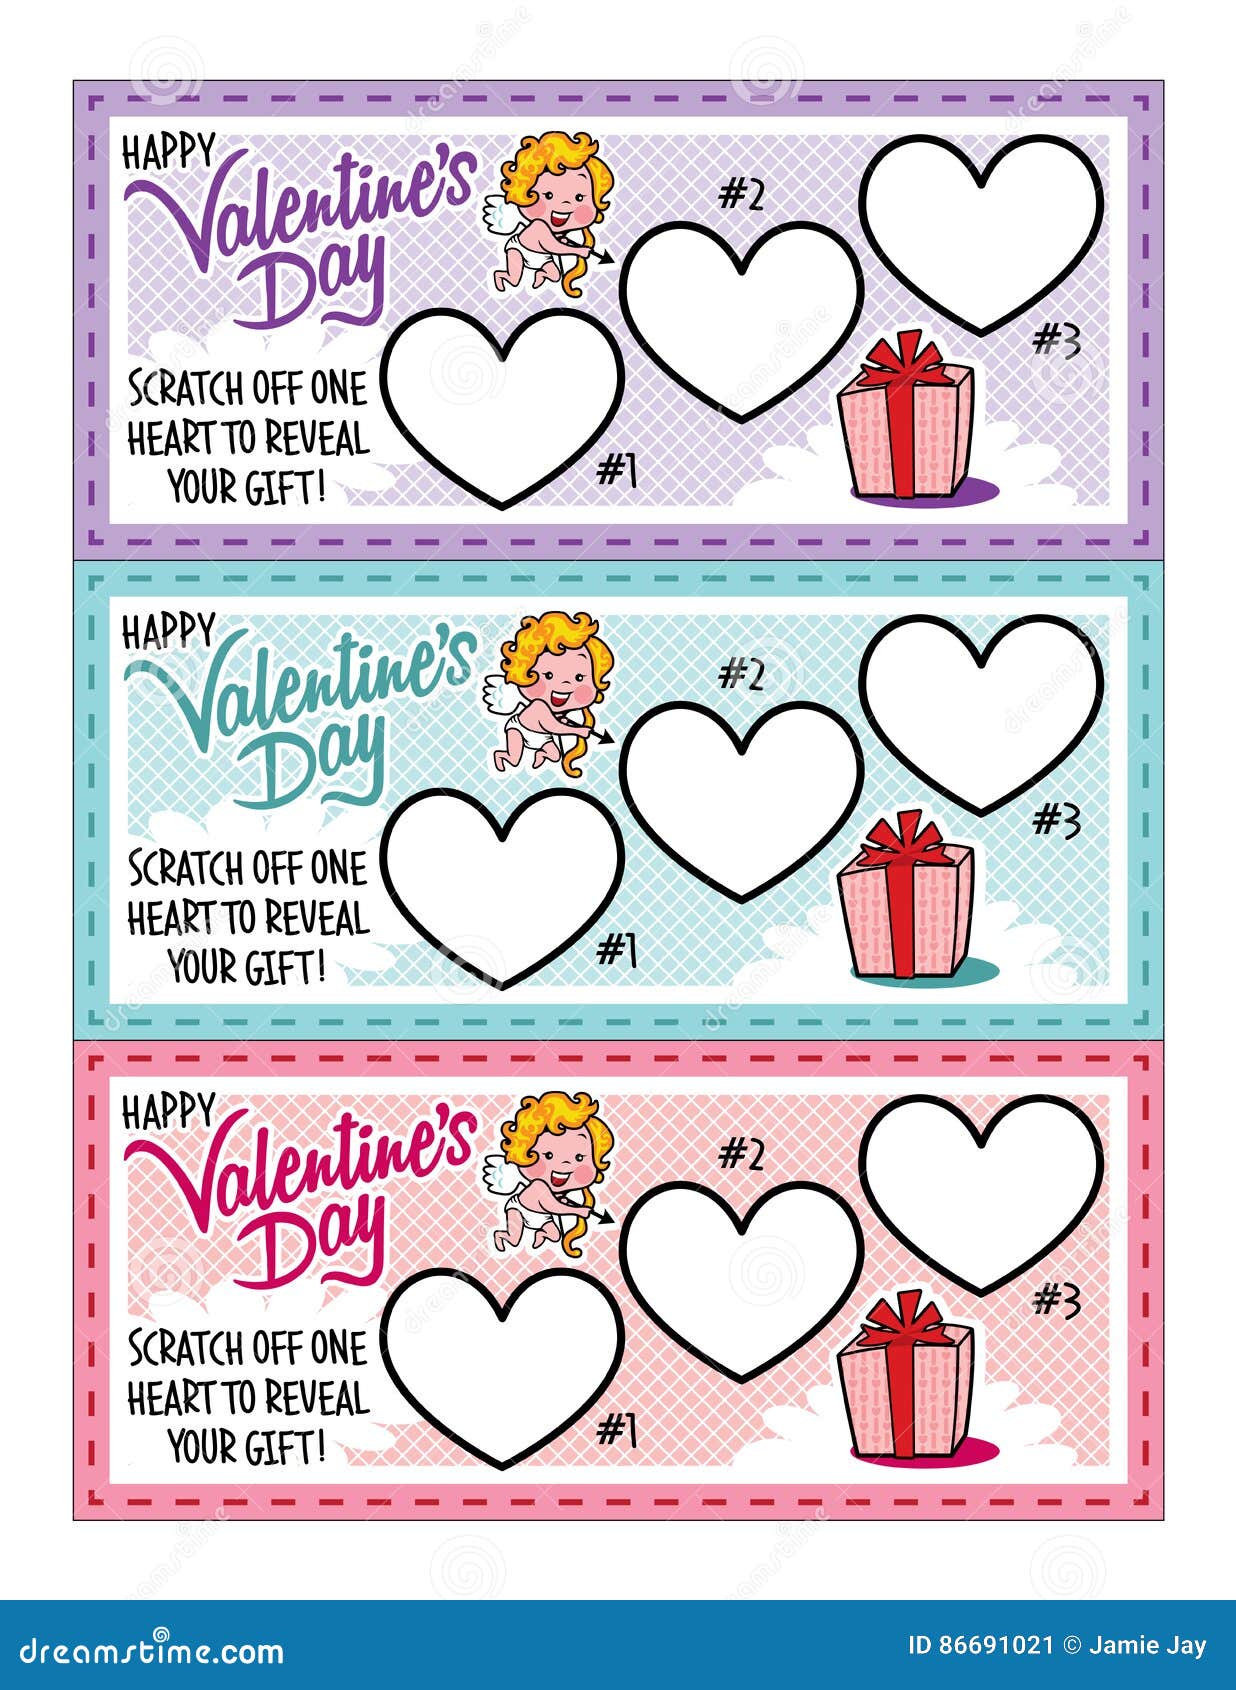 Scratch-off Love Coupons & Valentines